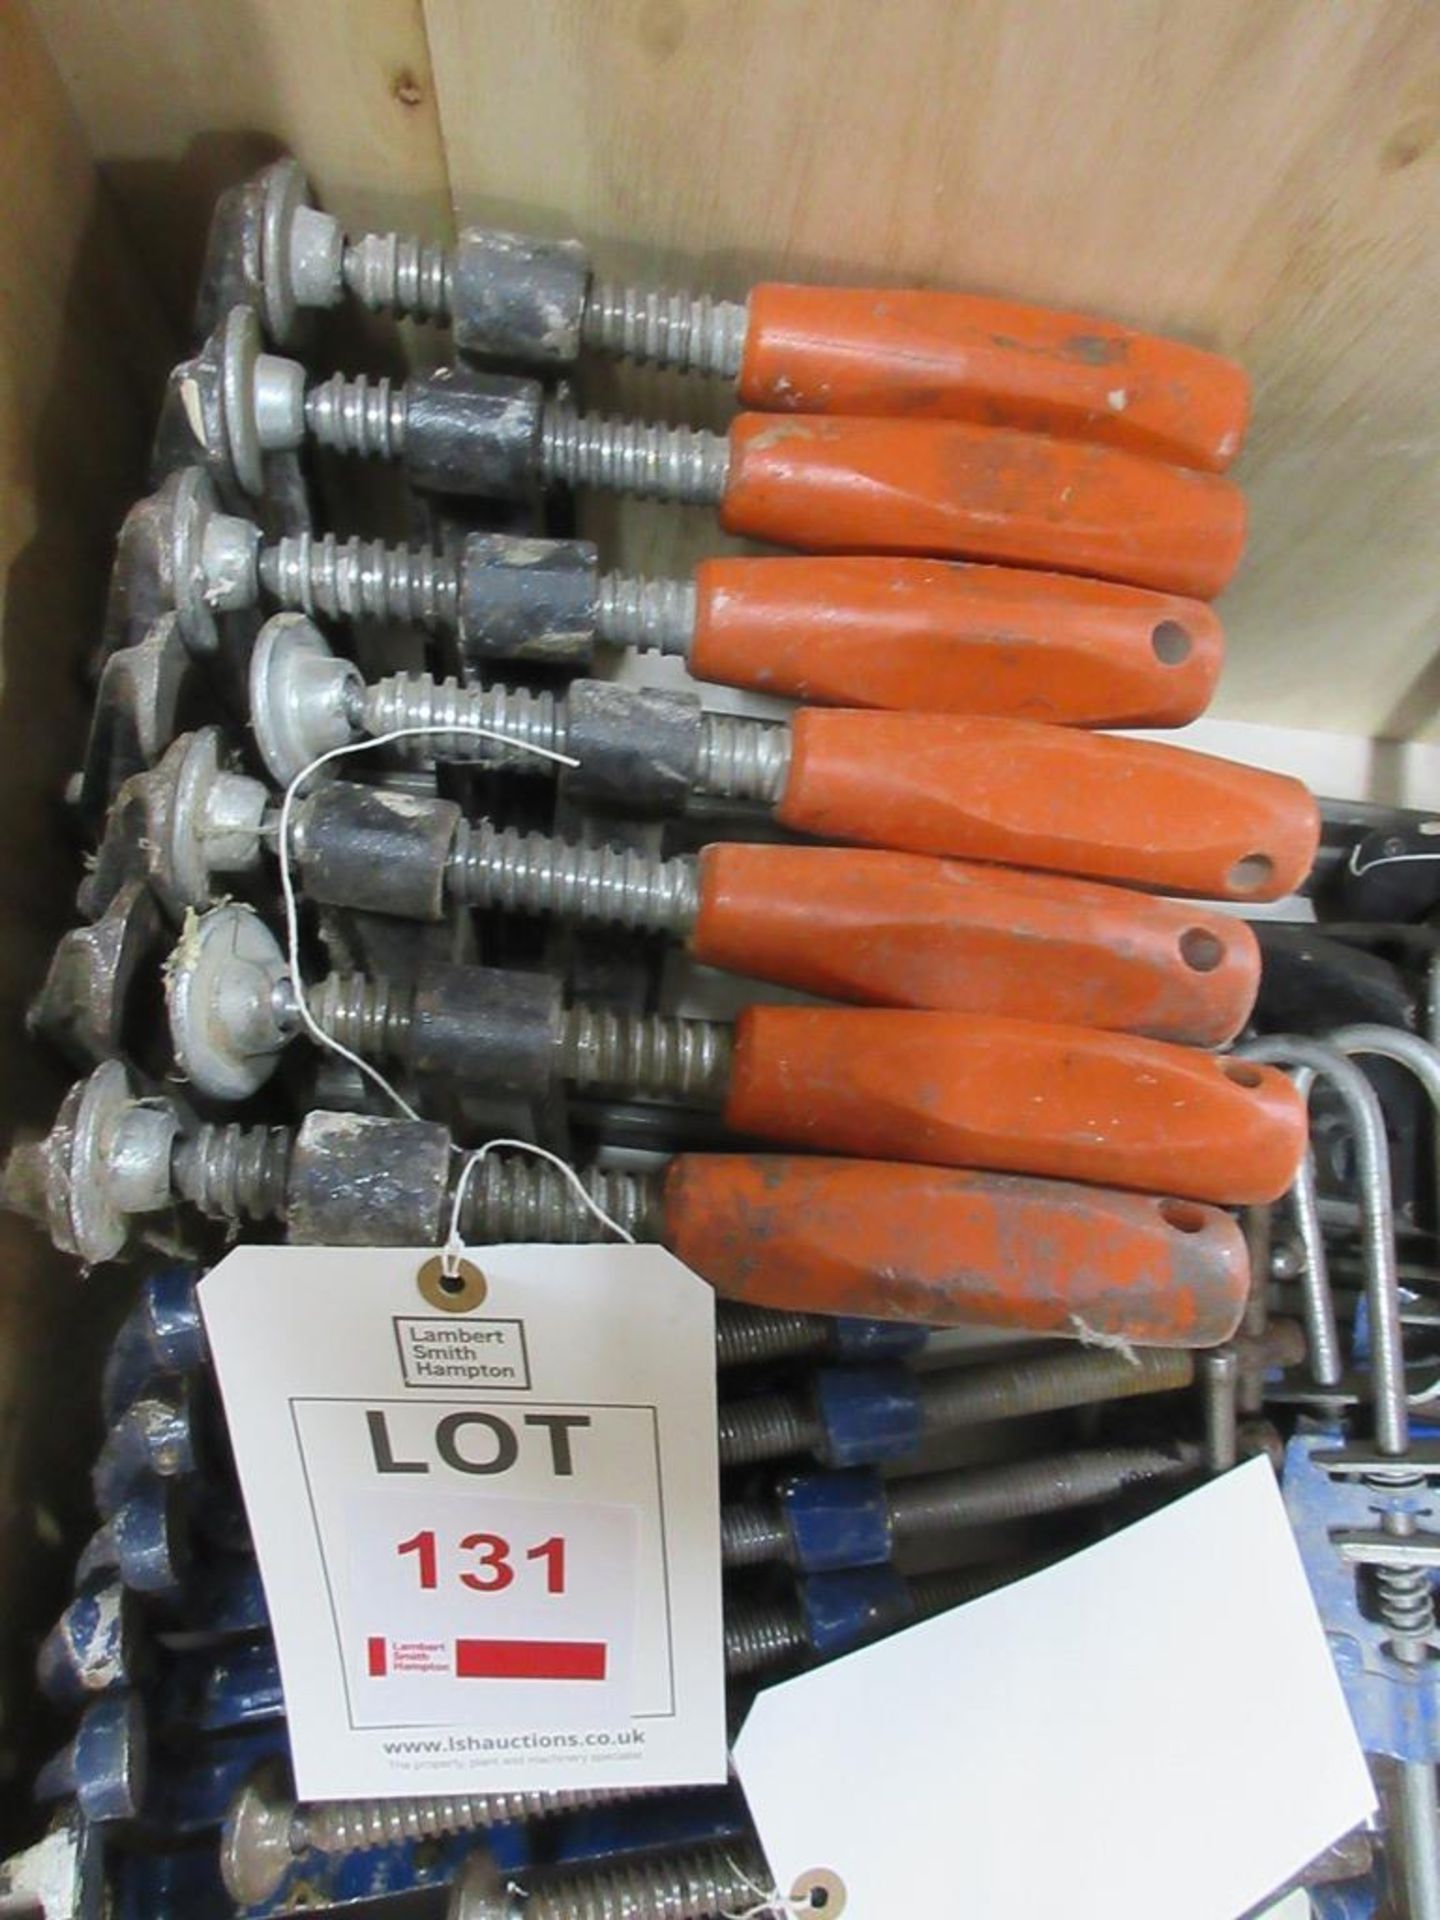 Quantity of 'F' clamps